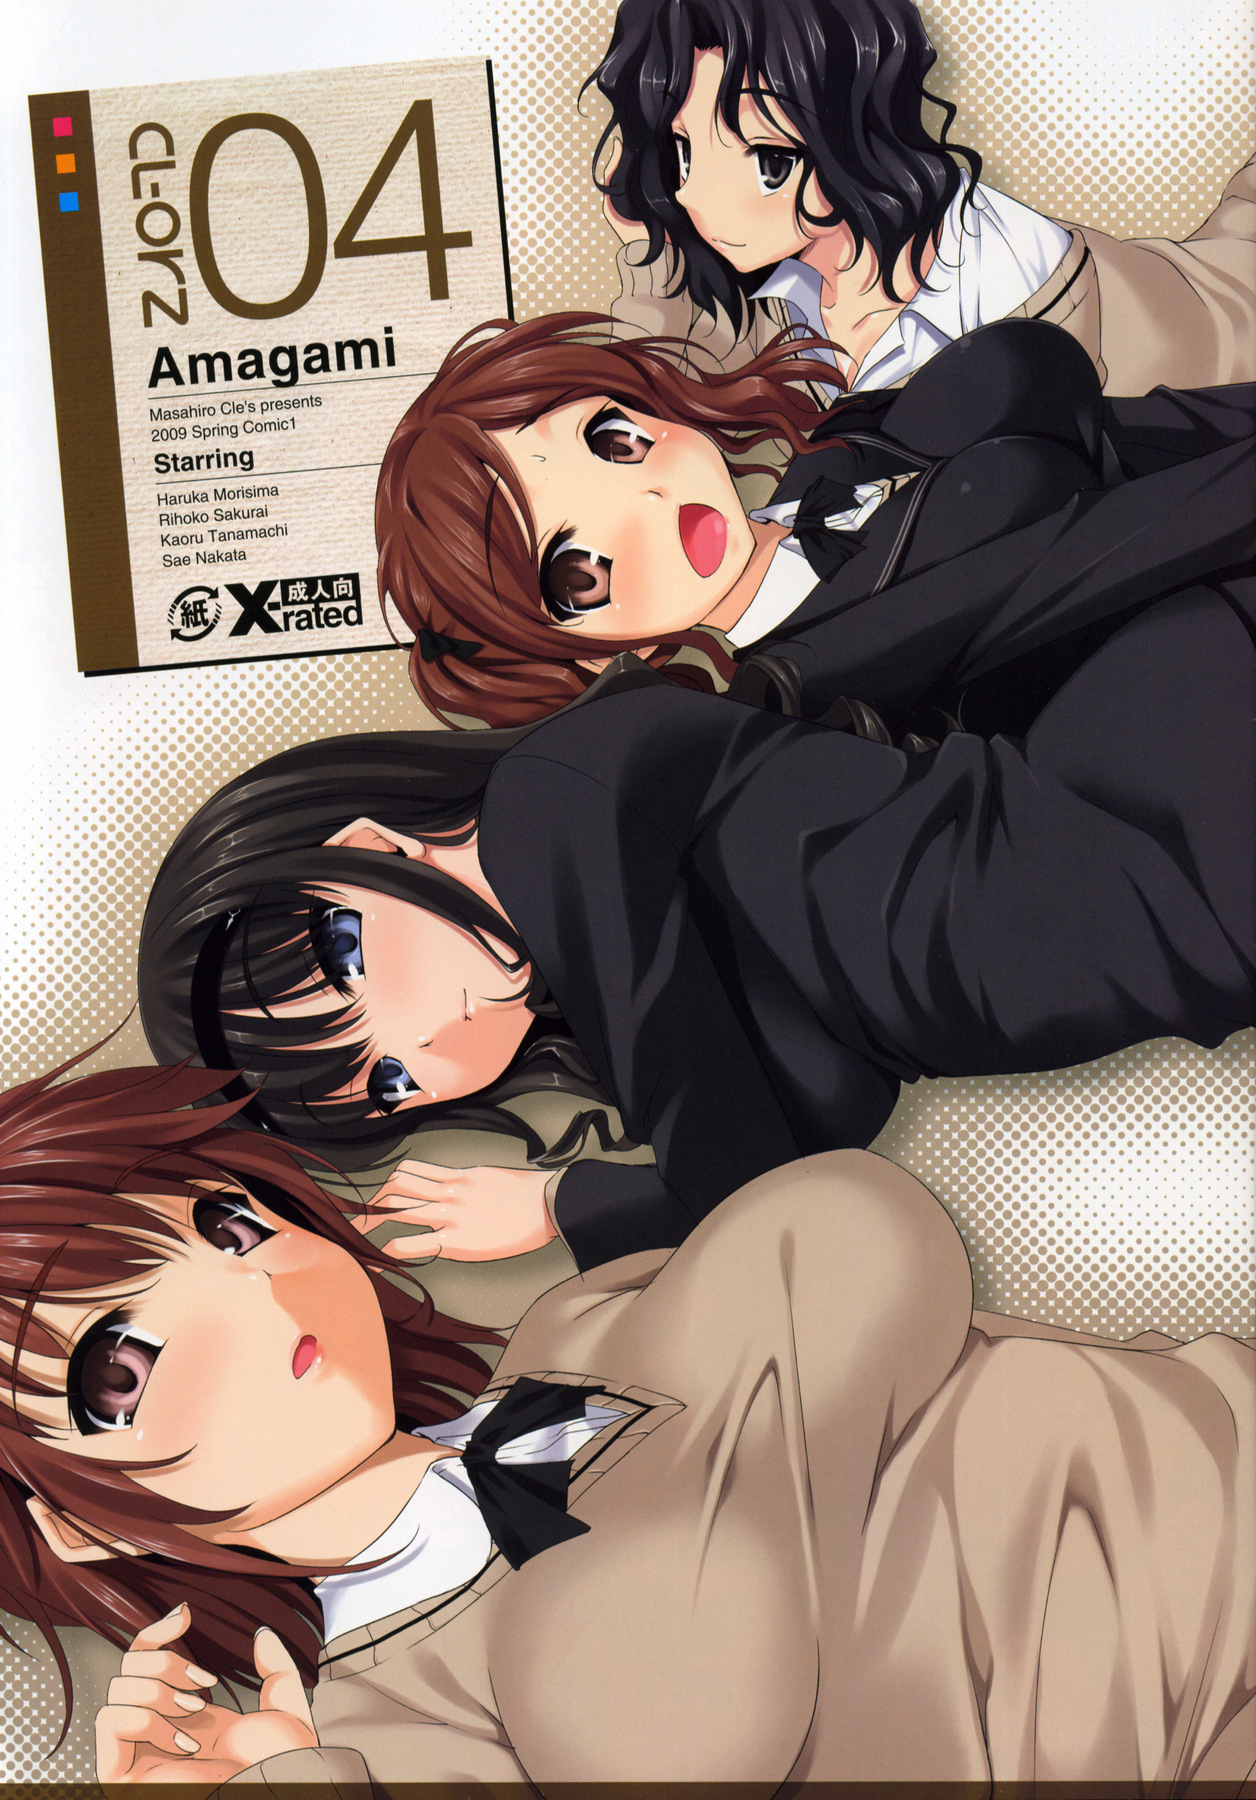 (COMIC1☆3) [Clesta (Cle Masahiro)] CL-orz'4 (Amagami) [Vietnamese Tiếng Việt] [Decensored] page 1 full